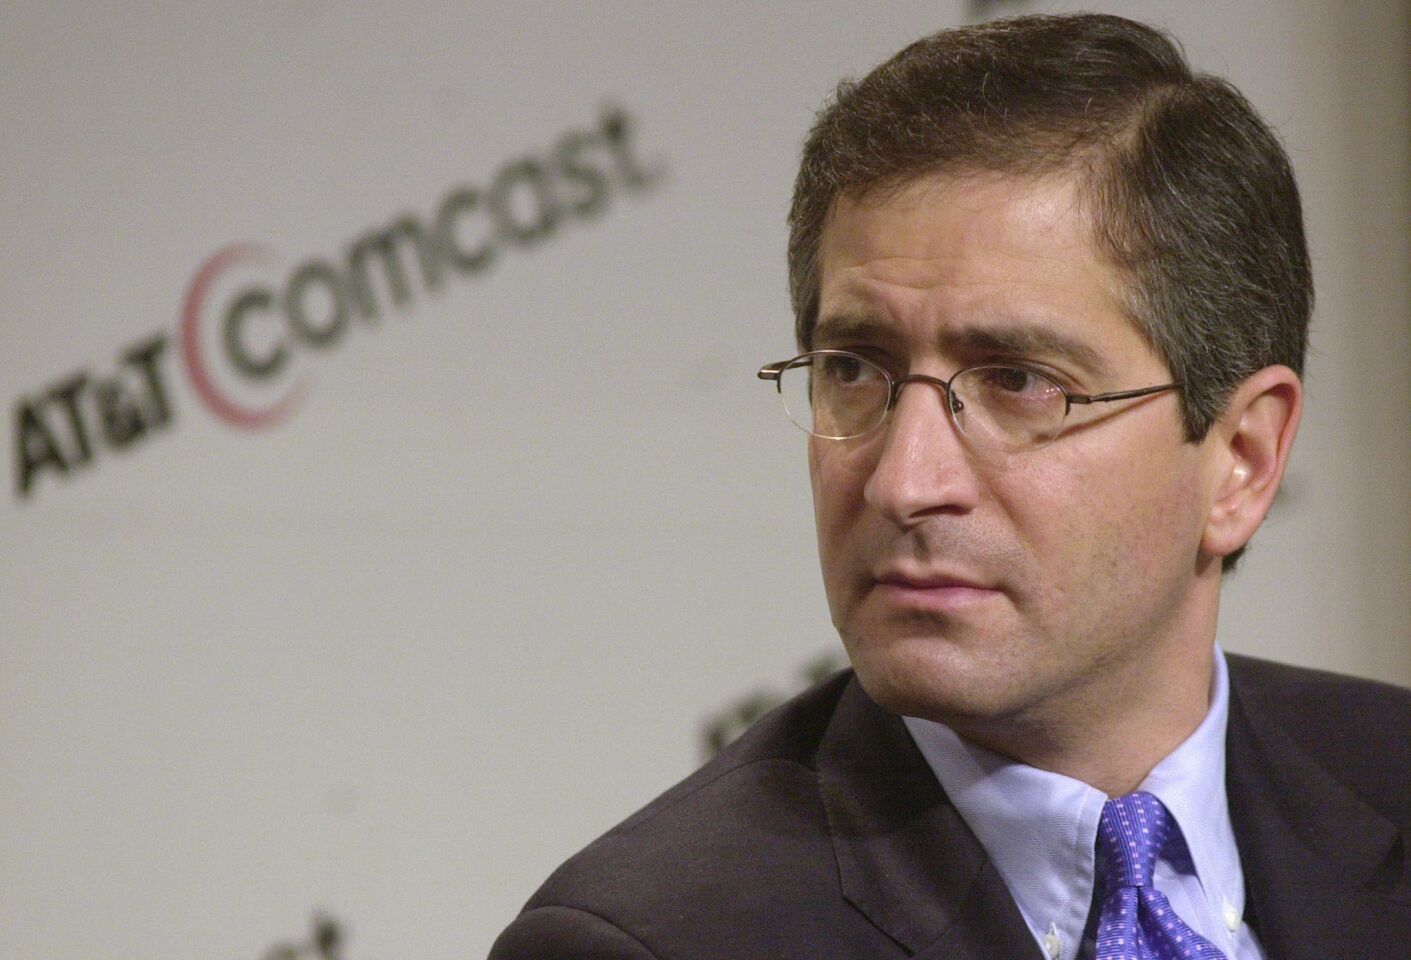 Brian Roberts, CEO of Comcast Corp., received a compensation package of $29 million in 2012. Roberts is chairman of the board of directors of the National Cable & Telecommunications Assn.